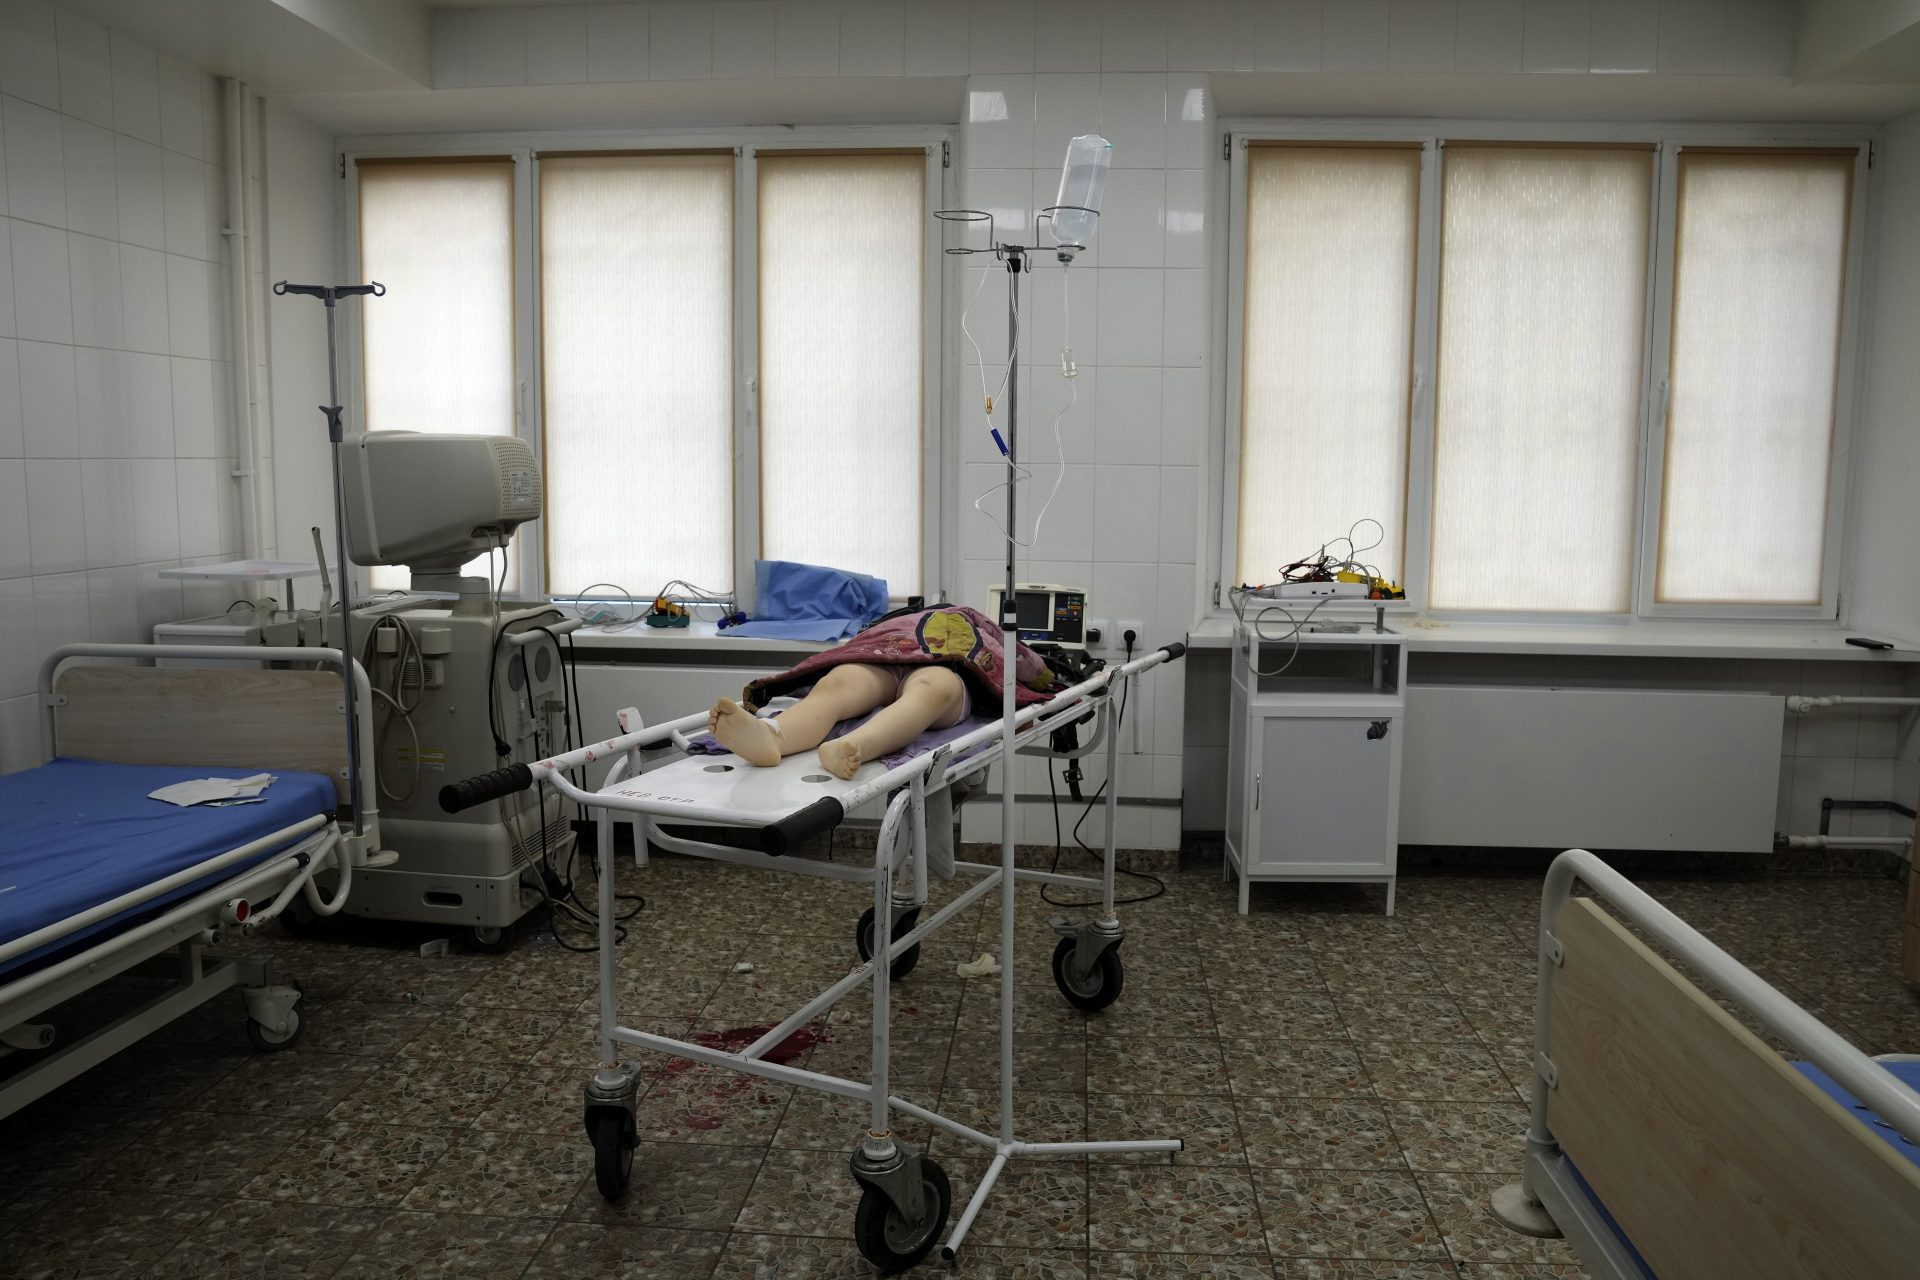 The lifeless body of a girl killed during shelling at a residential area lies on a medical cart at the city hospital of Mariupol, eastern Ukraine, Sunday, Feb. 27, 2022.